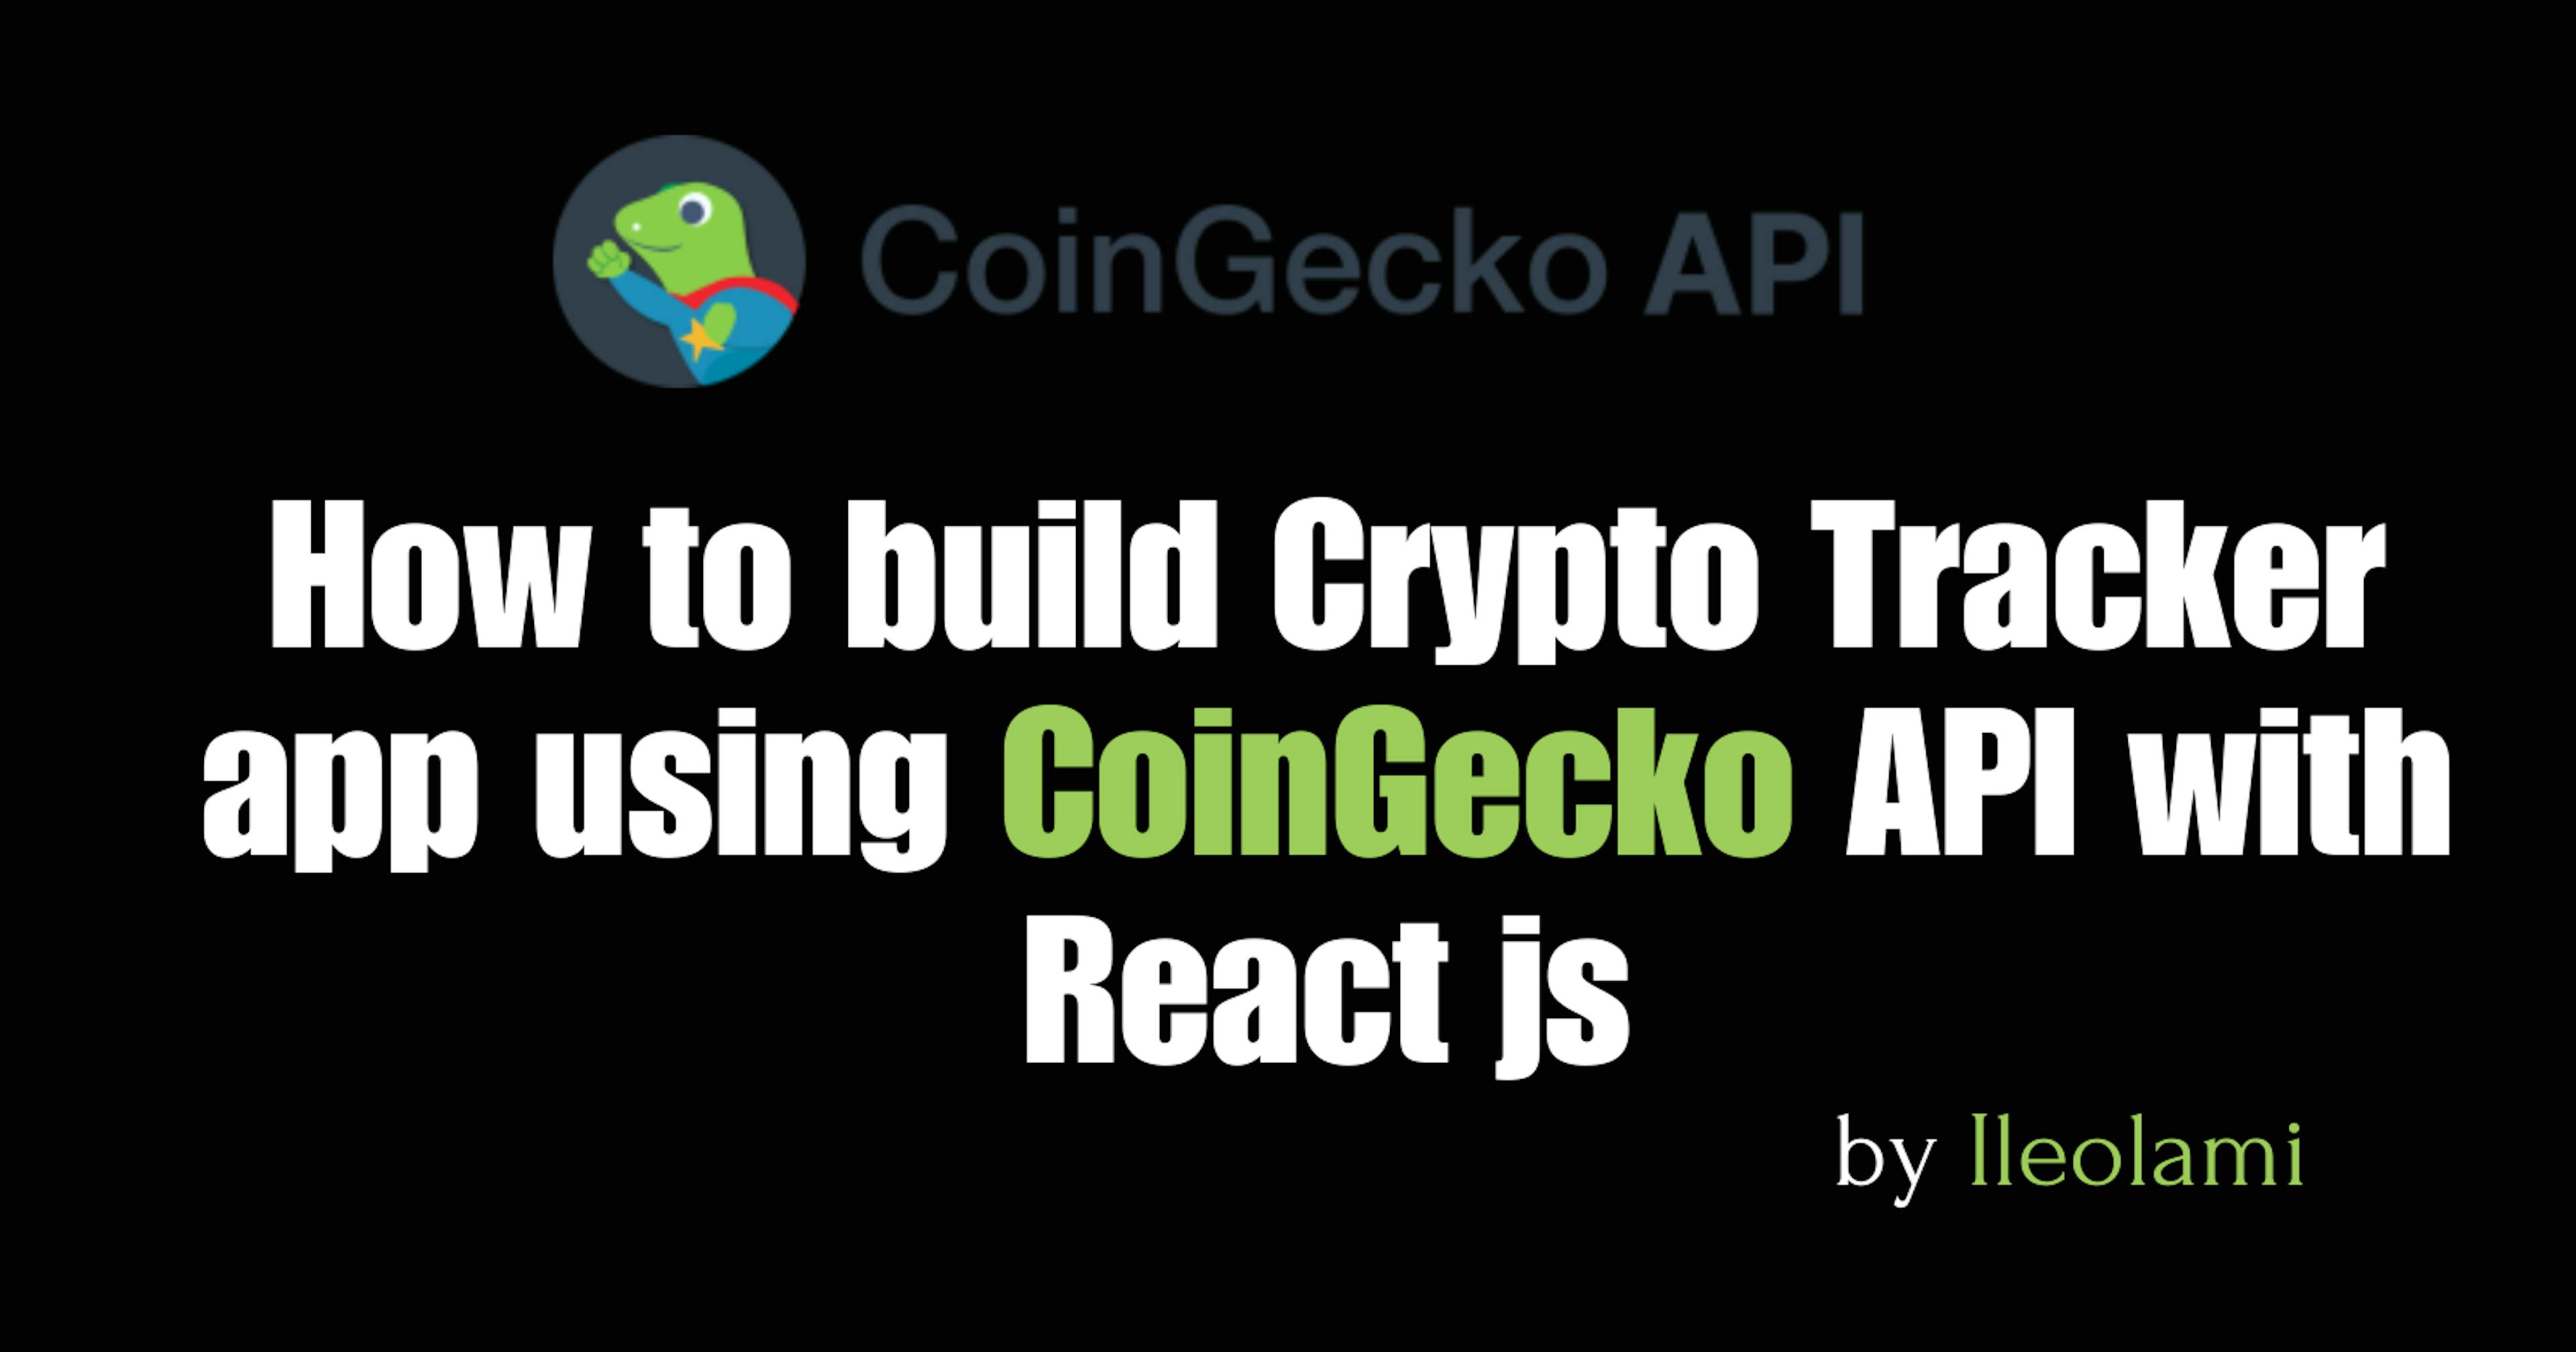 featured image - Build a Real-Time Crypto Tracker with CoinGecko API and React.js